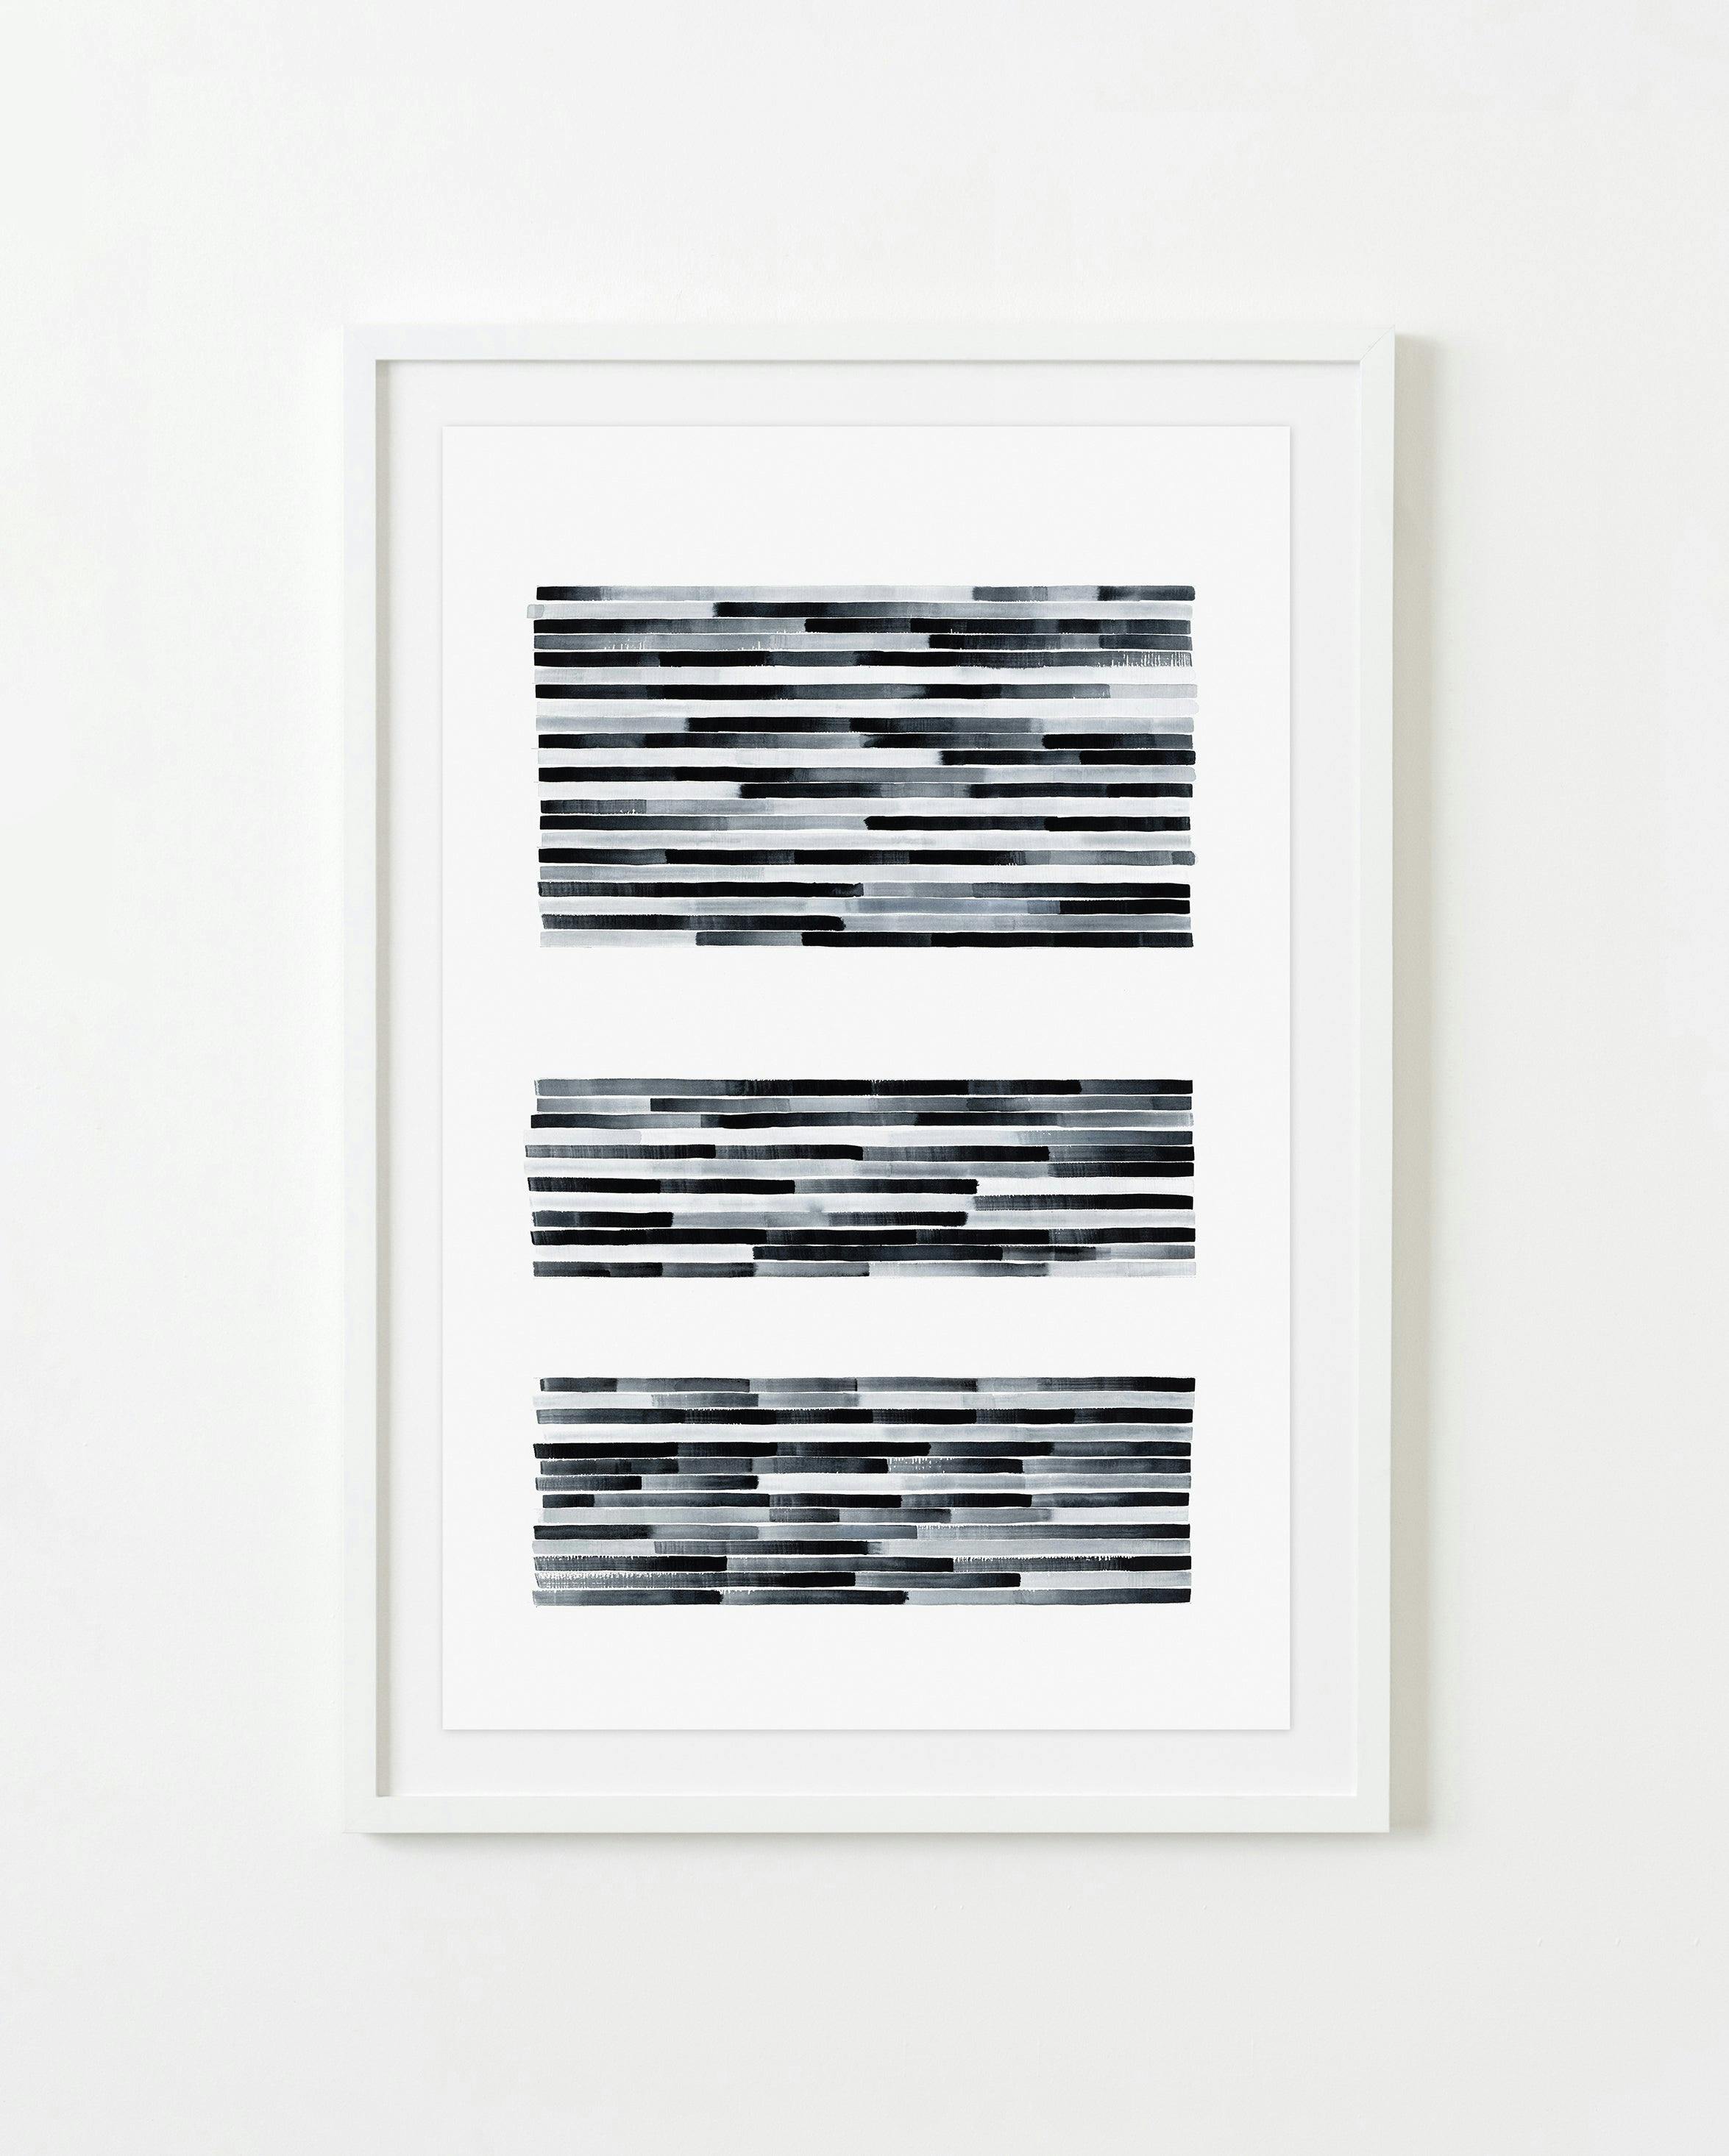 Painting by Gail Tarantino titled "Redaction Revisited - Version V".